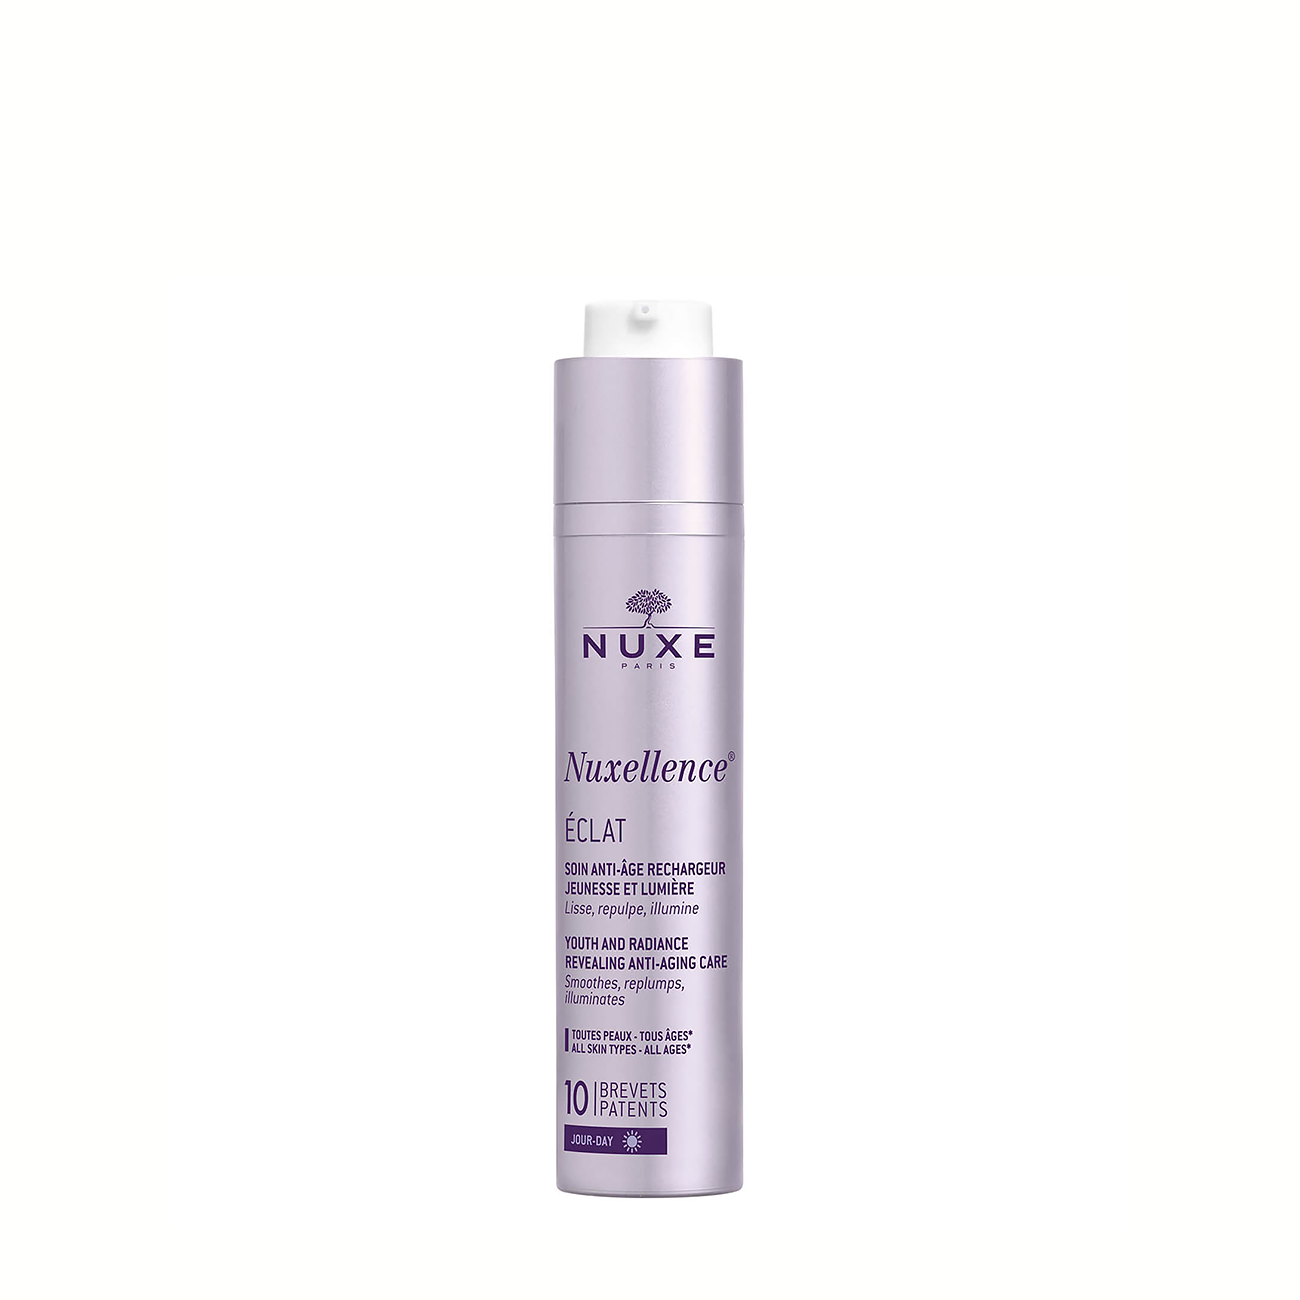 Masca tratament Nuxe NUXELLENCE – ECLAT YOUTH AND RADIANCE REVEALING ANTI-AGING CARE 50ml cu comanda online